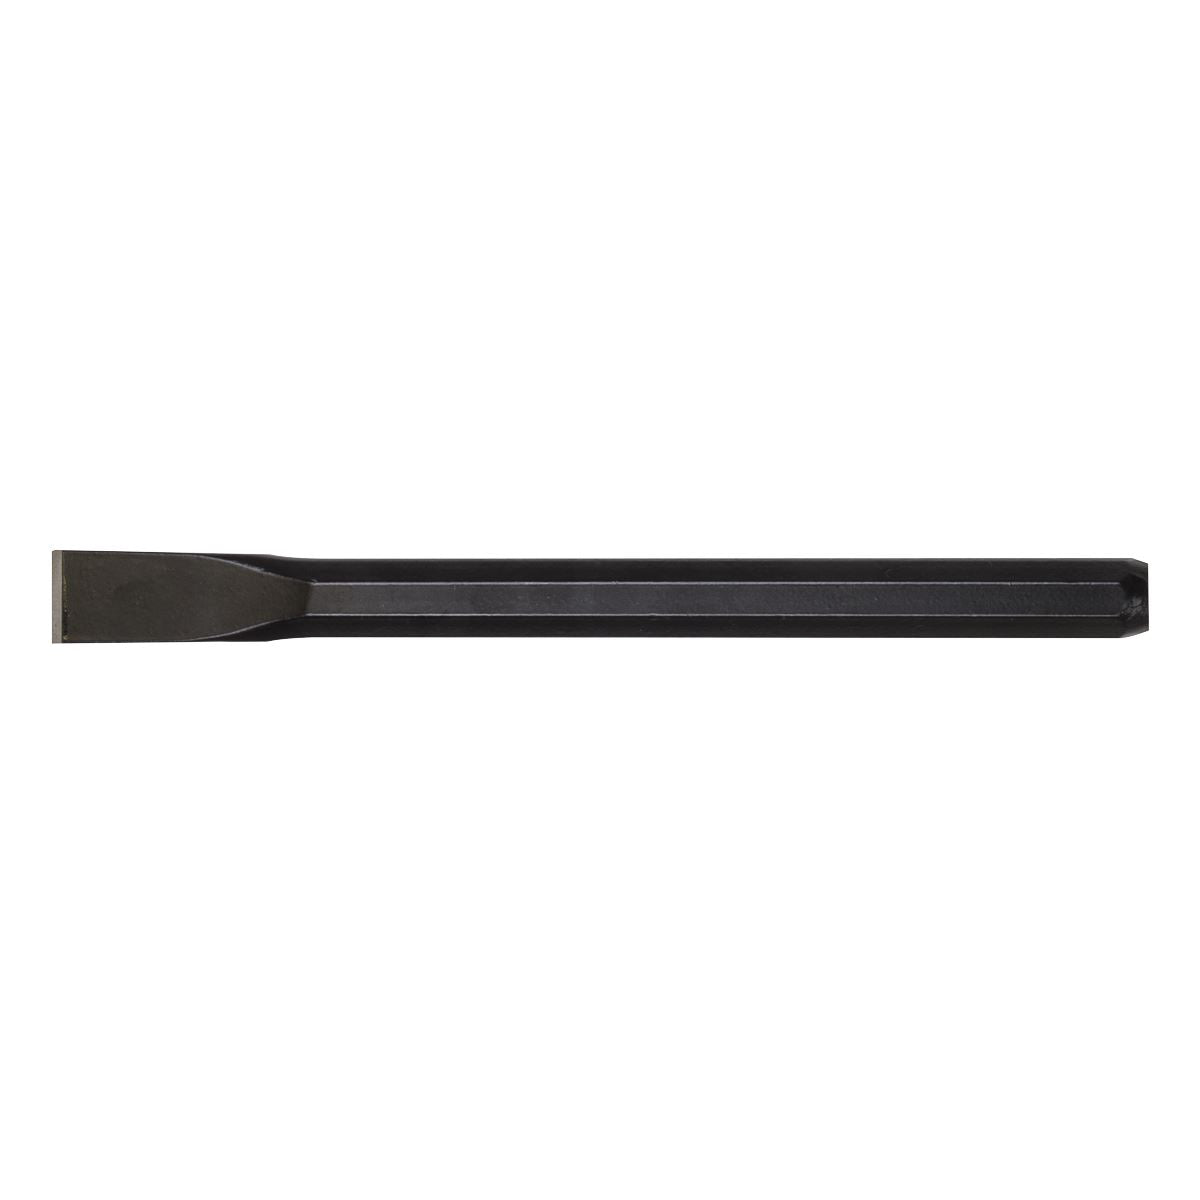 Sealey Cold Chisel 25 x 300mm